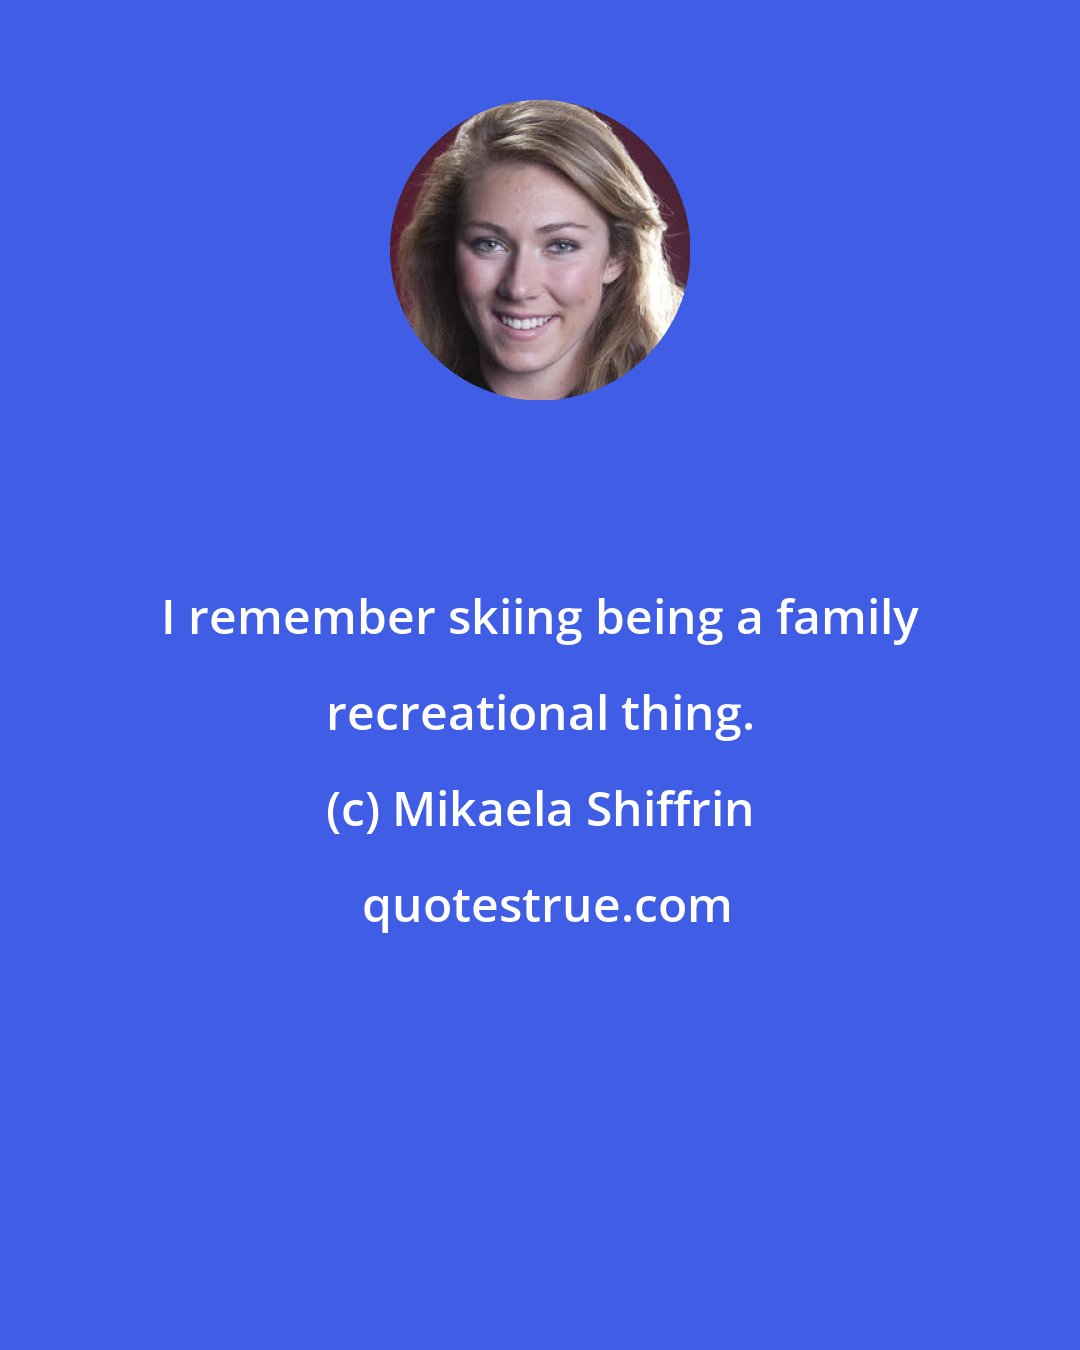 Mikaela Shiffrin: I remember skiing being a family recreational thing.